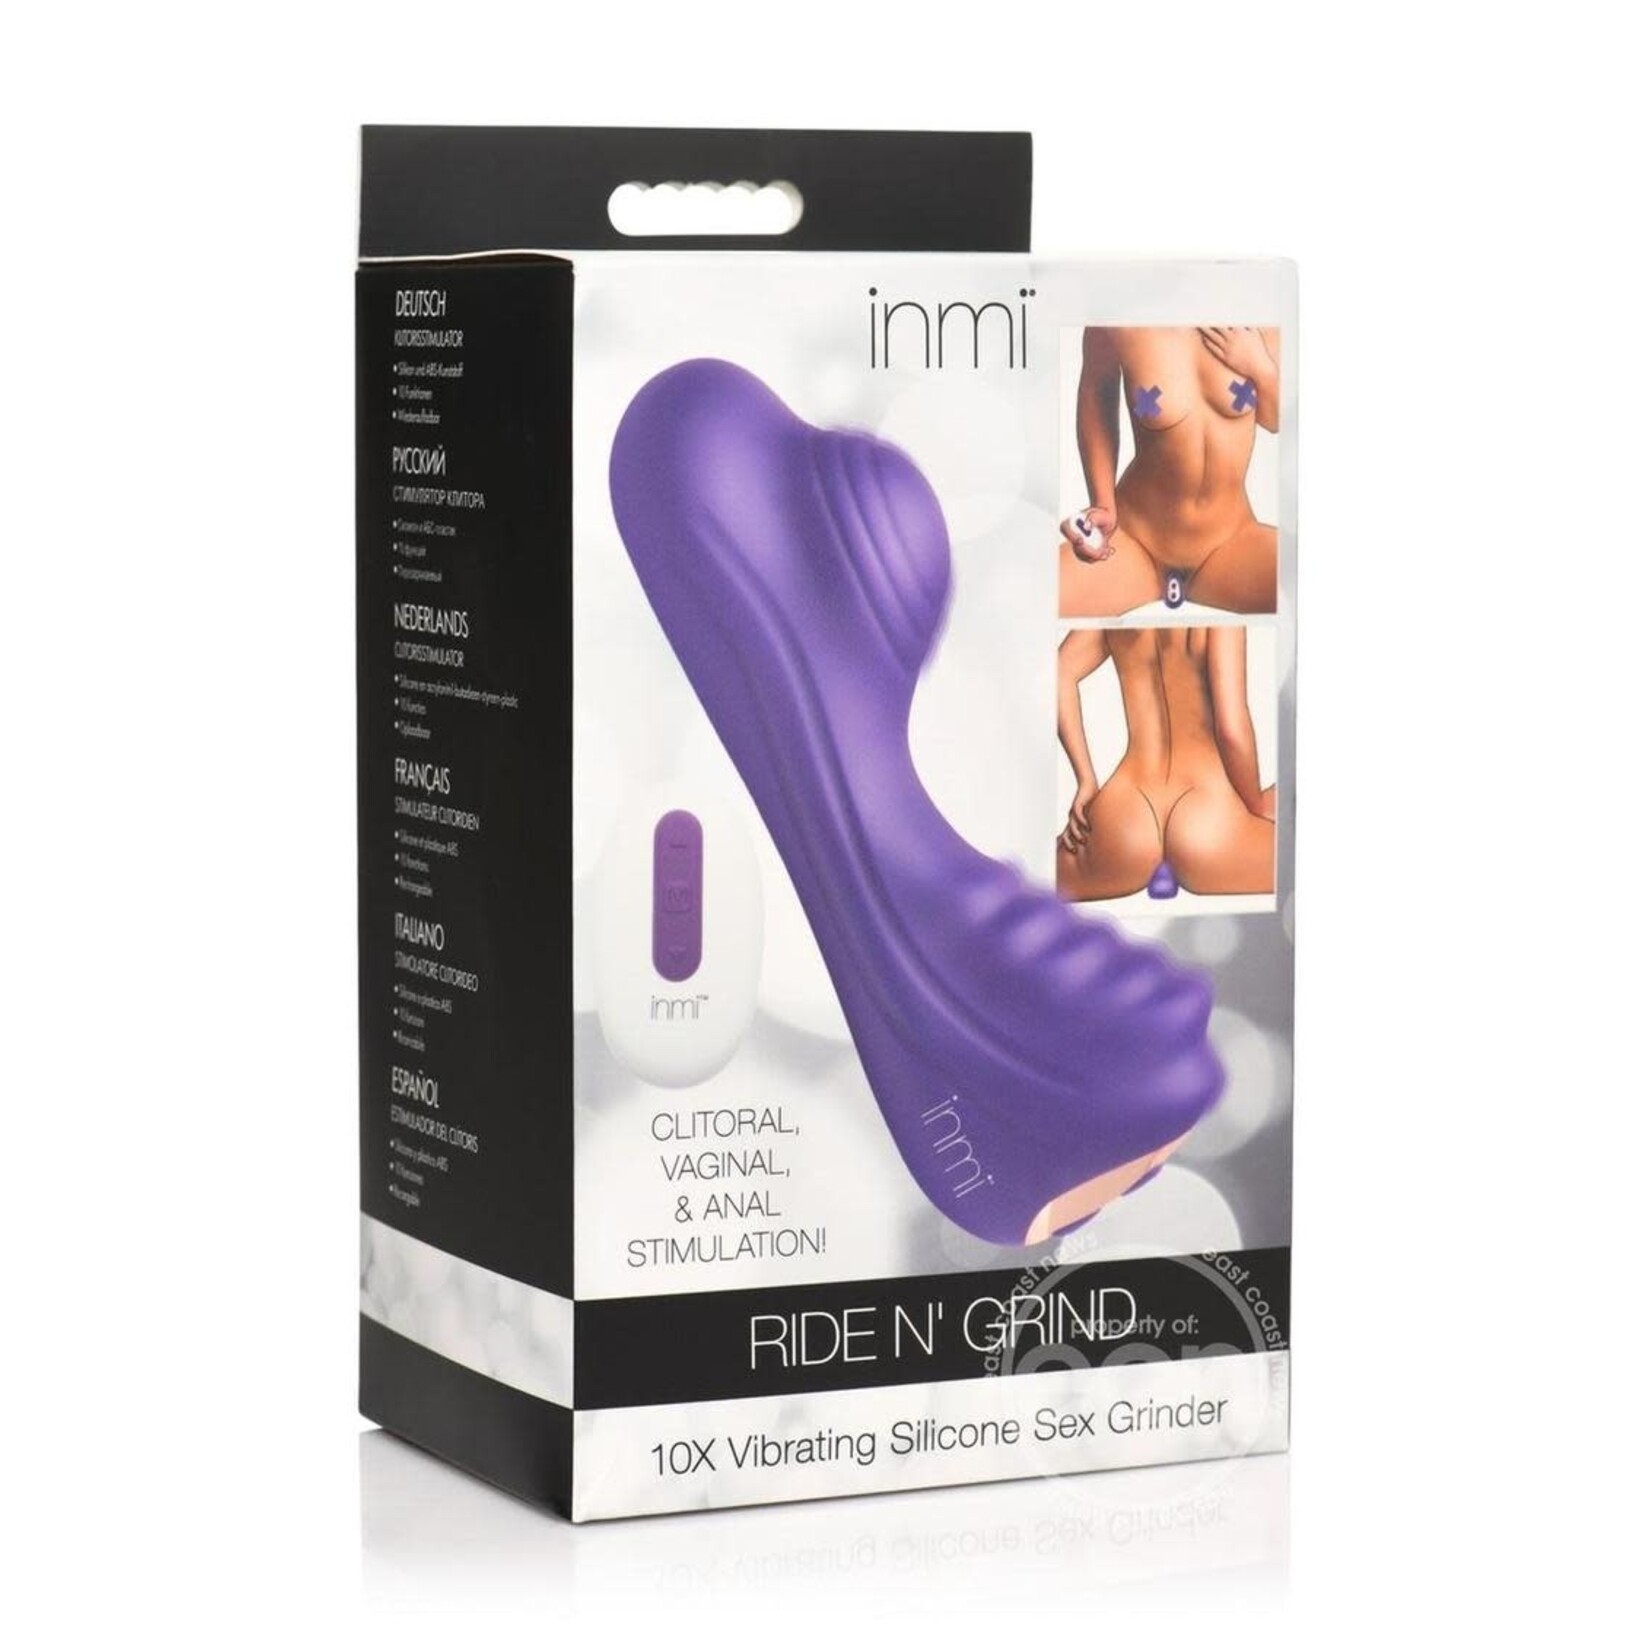 Inmi Ride N' Grind 10X Vibrating Rechargeable Silicone Grinding Clitoral Stimulator with Remote Control - Purple